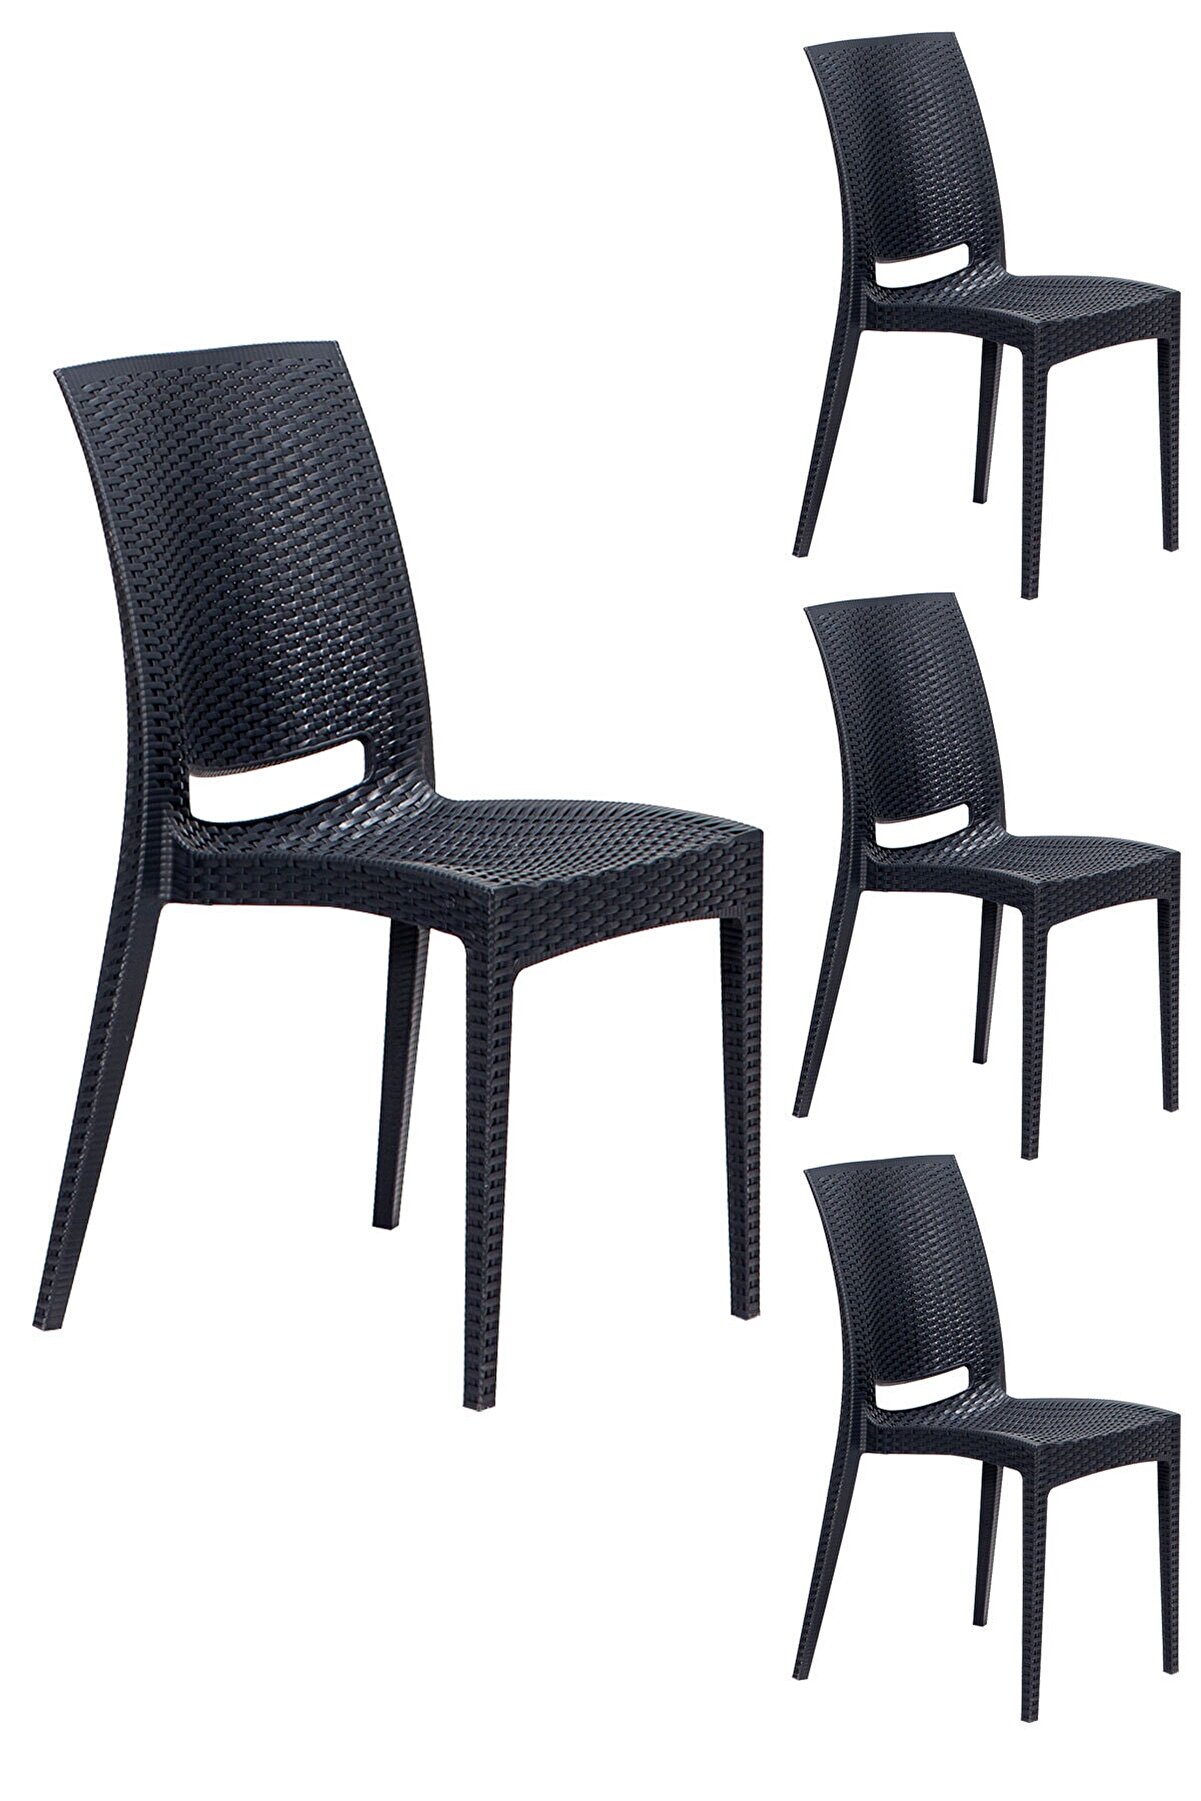 4 Pieces Rattan Anthracite Chairs / Balcony-Garden-Terrace